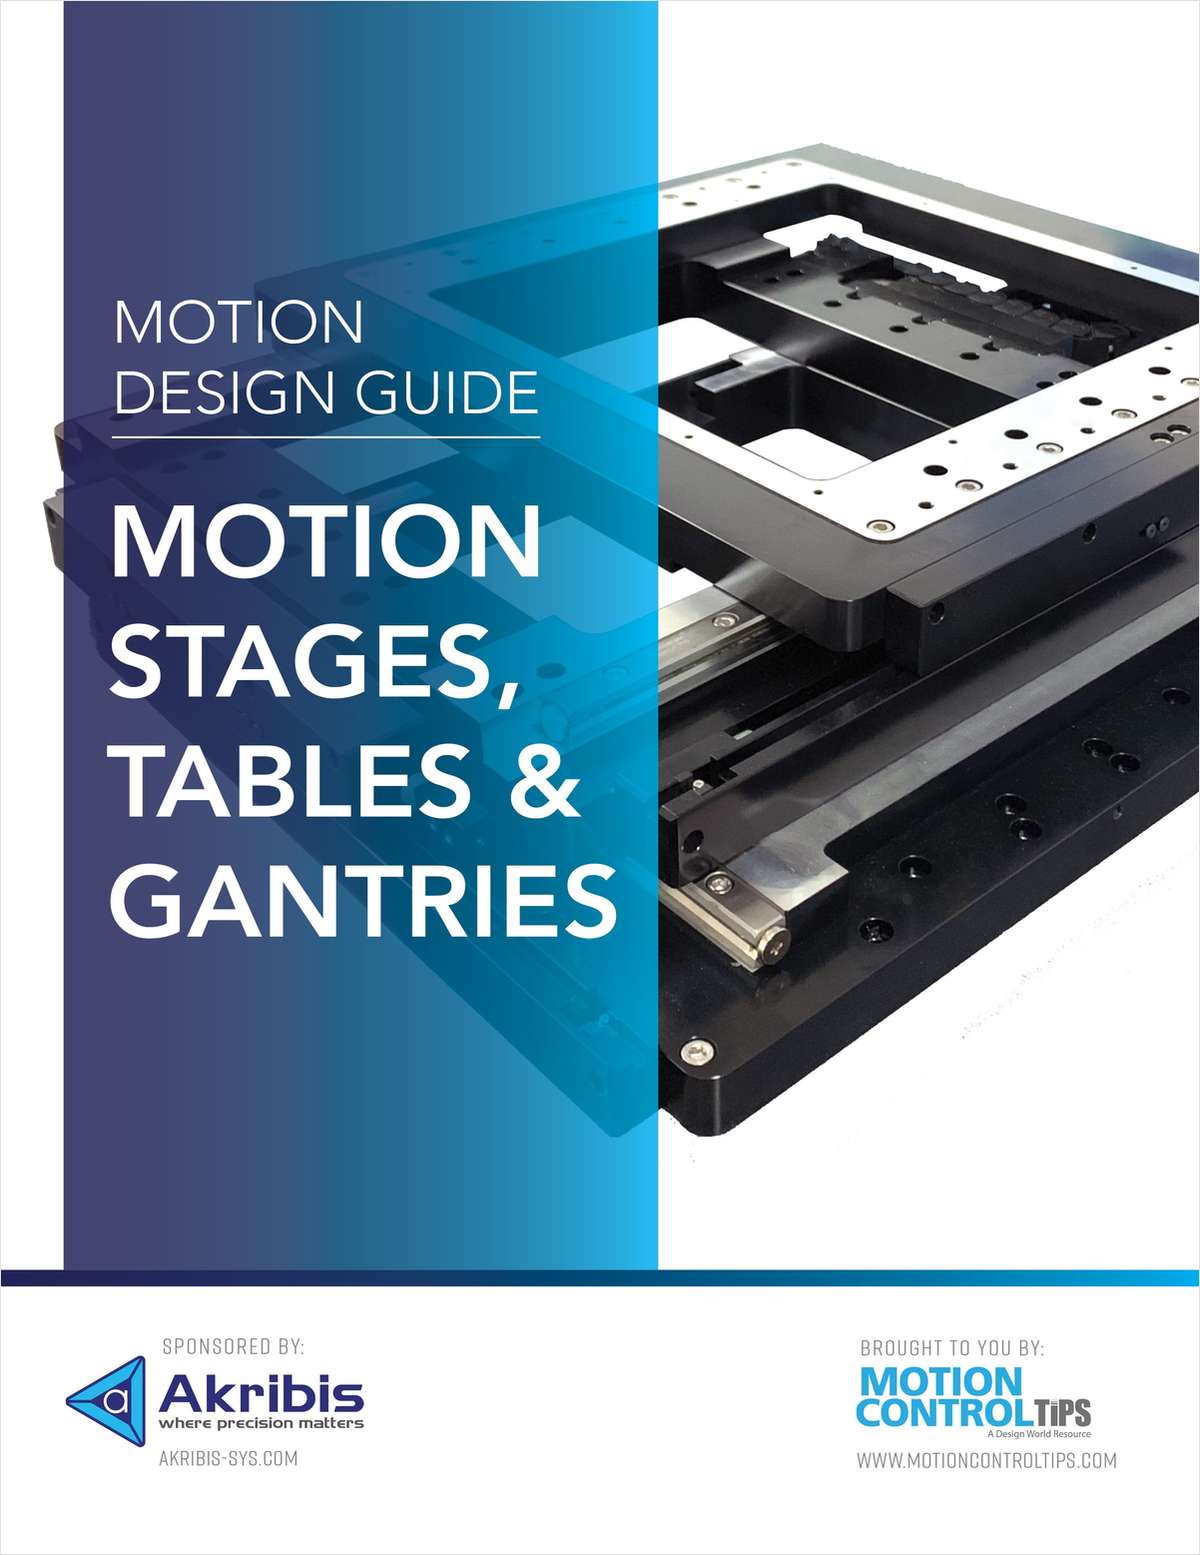 Motion Stages, Tables & Gantries